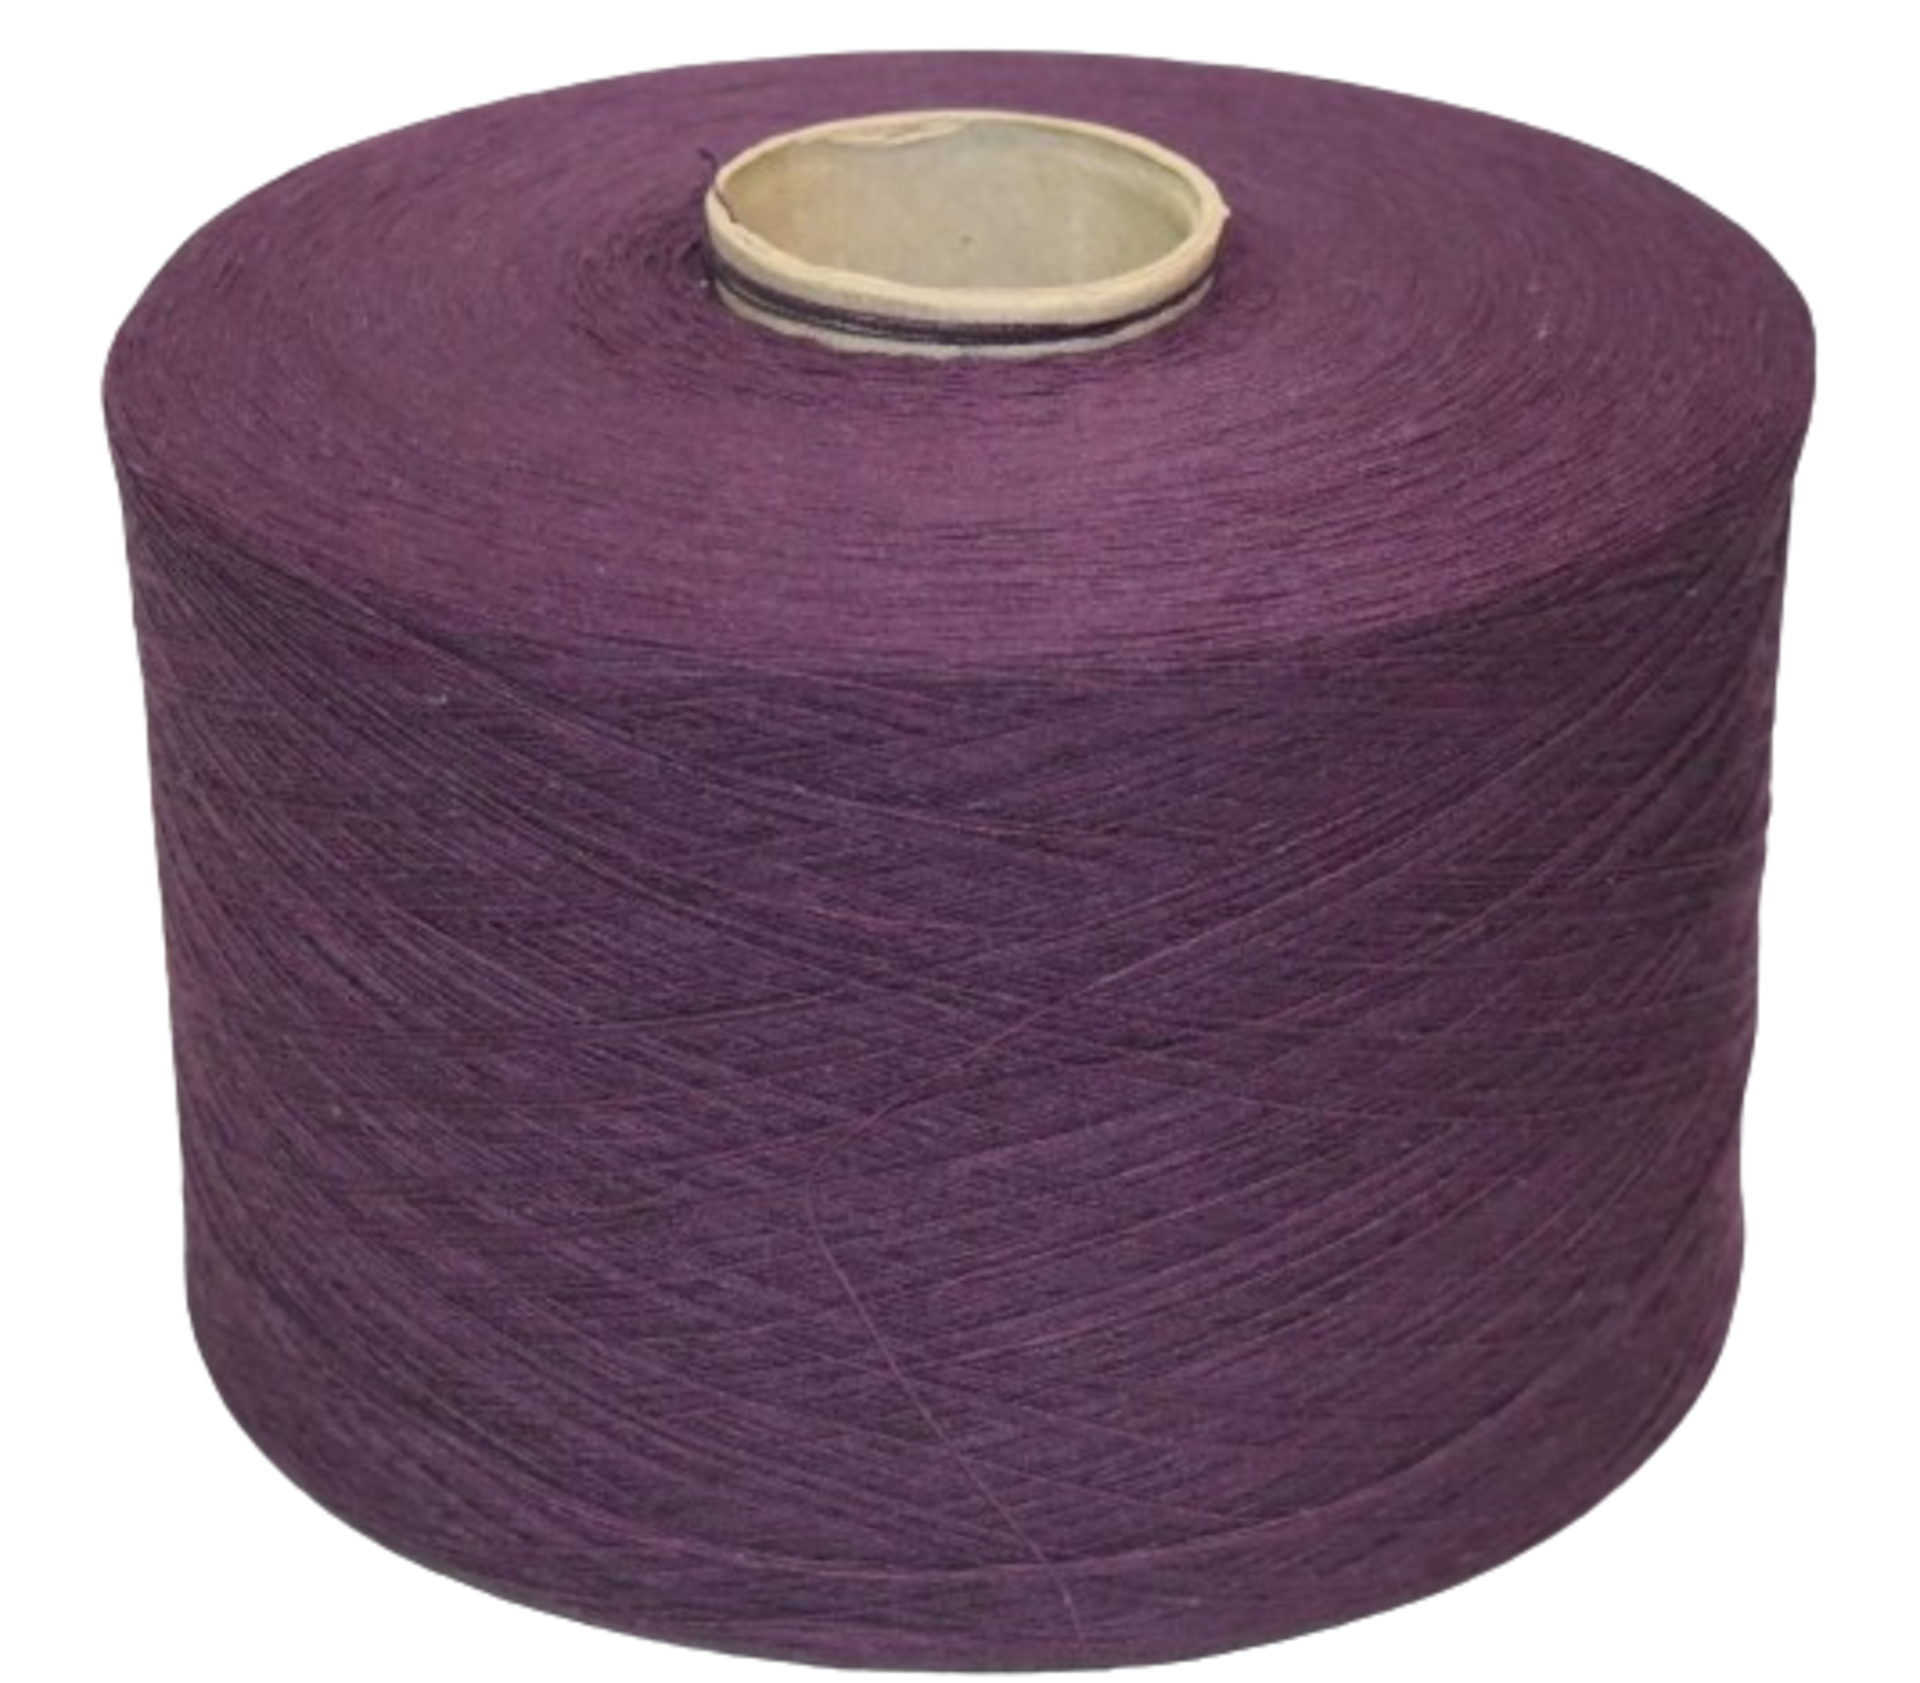 12 x Cones of 1/13 MicroCotton Knitting Yarn - Purple - Approx Weight: 2,300g - New Stock ABL Yarn - Image 3 of 15